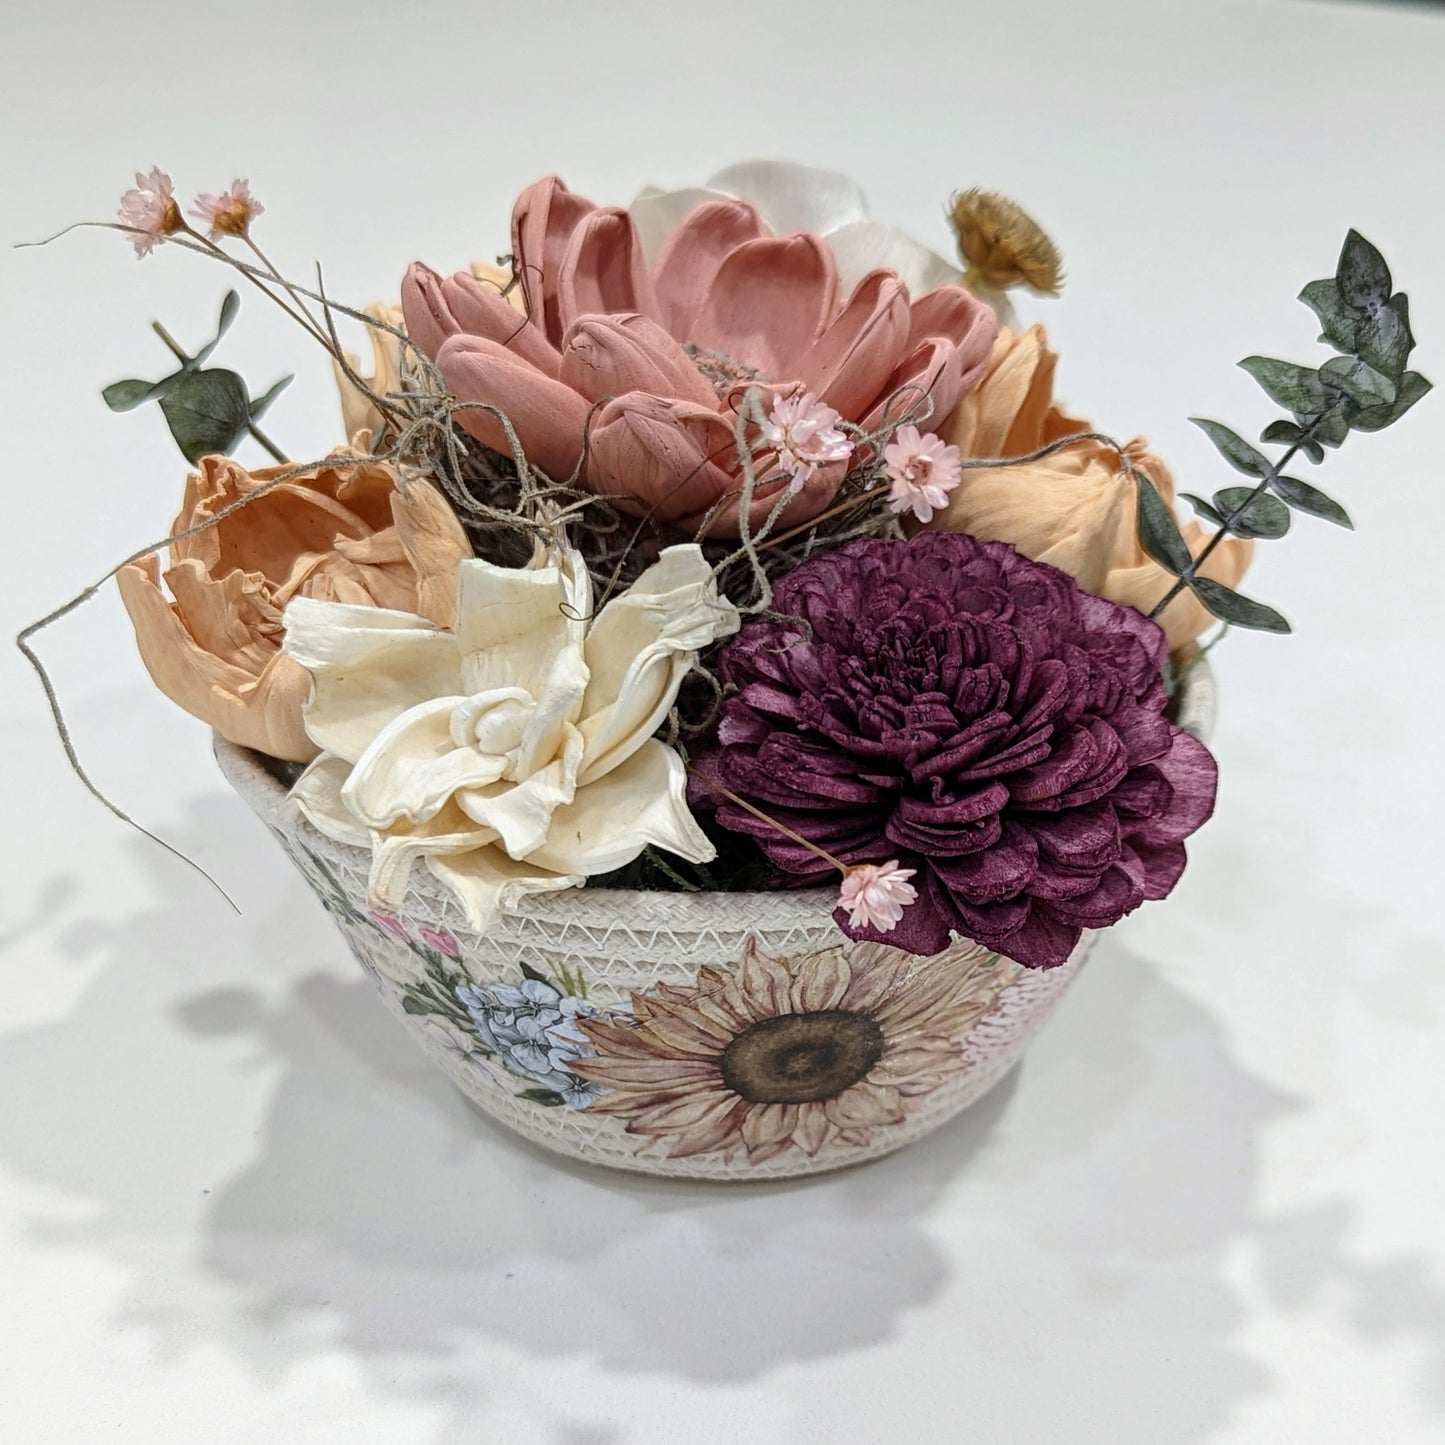 Spring Sola Flowers: A Rope Bowl of Pretties!